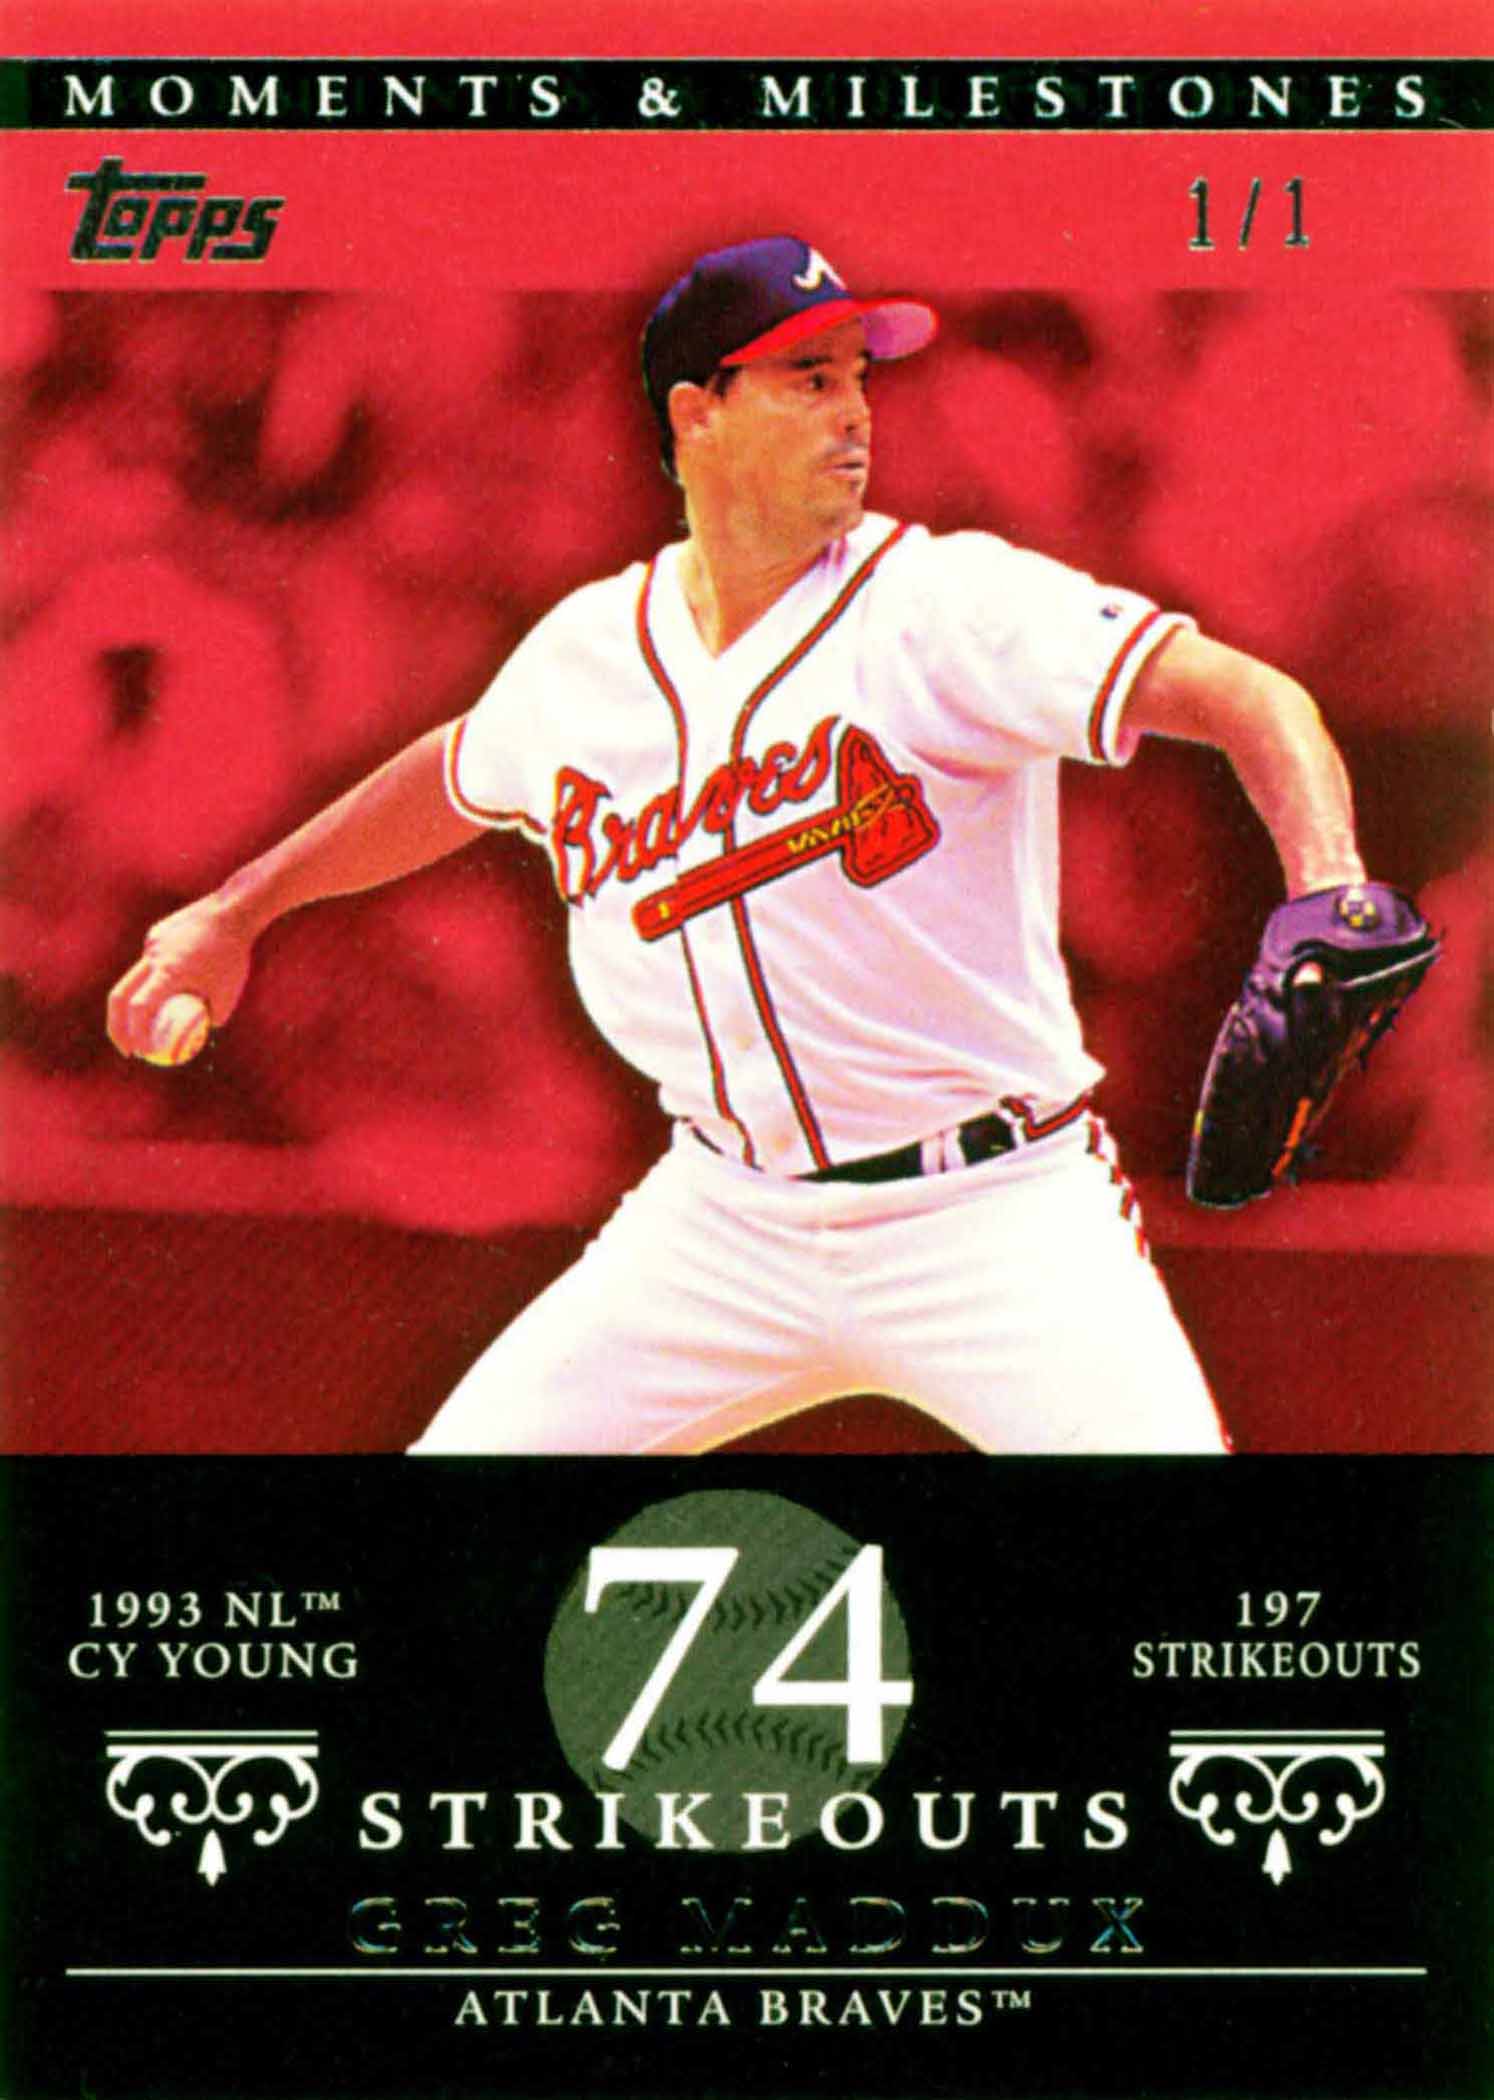 2007 Topps Moments and Milestones Red